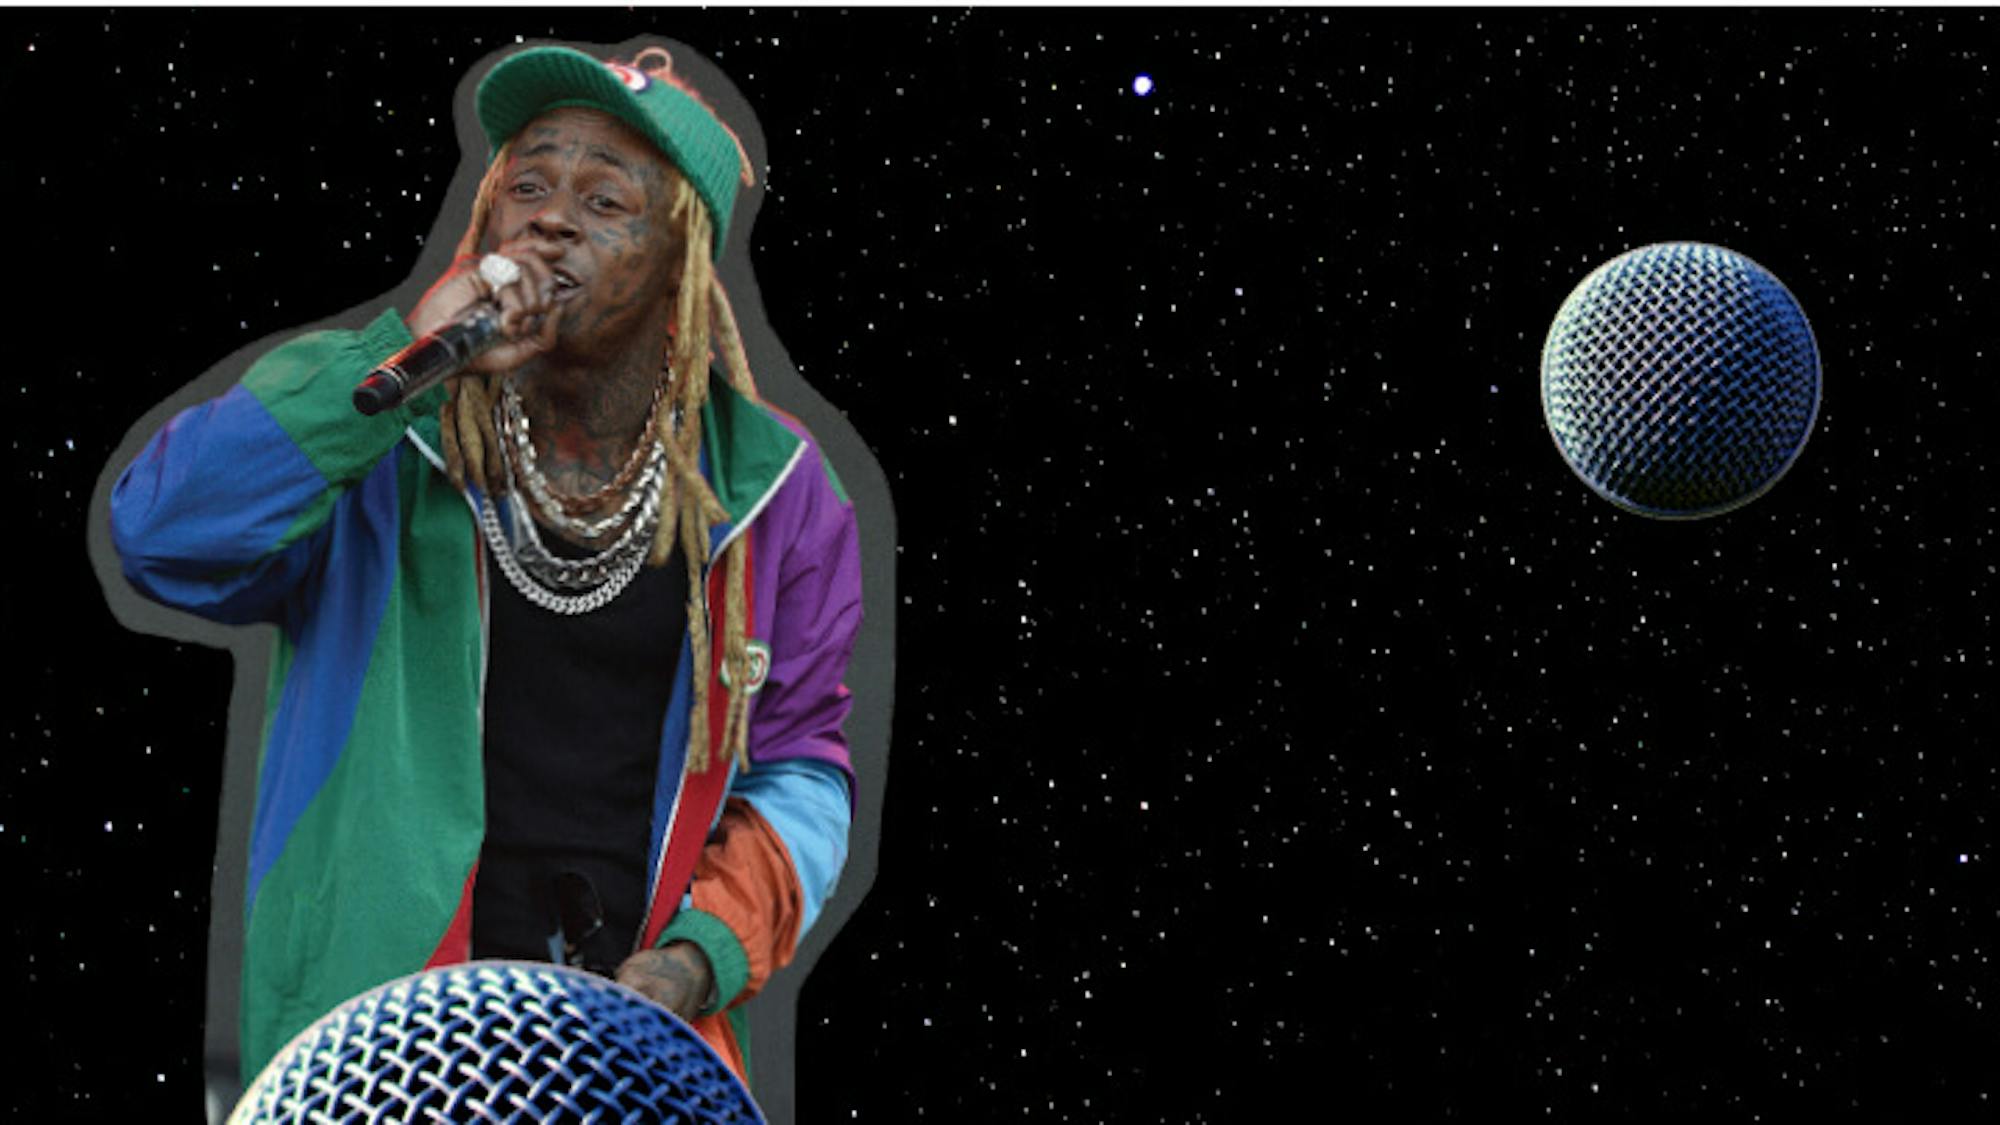 Lil Wayne sings in a mic, dripping with necklaces and wearing a multi-colored jacket and matching hat.